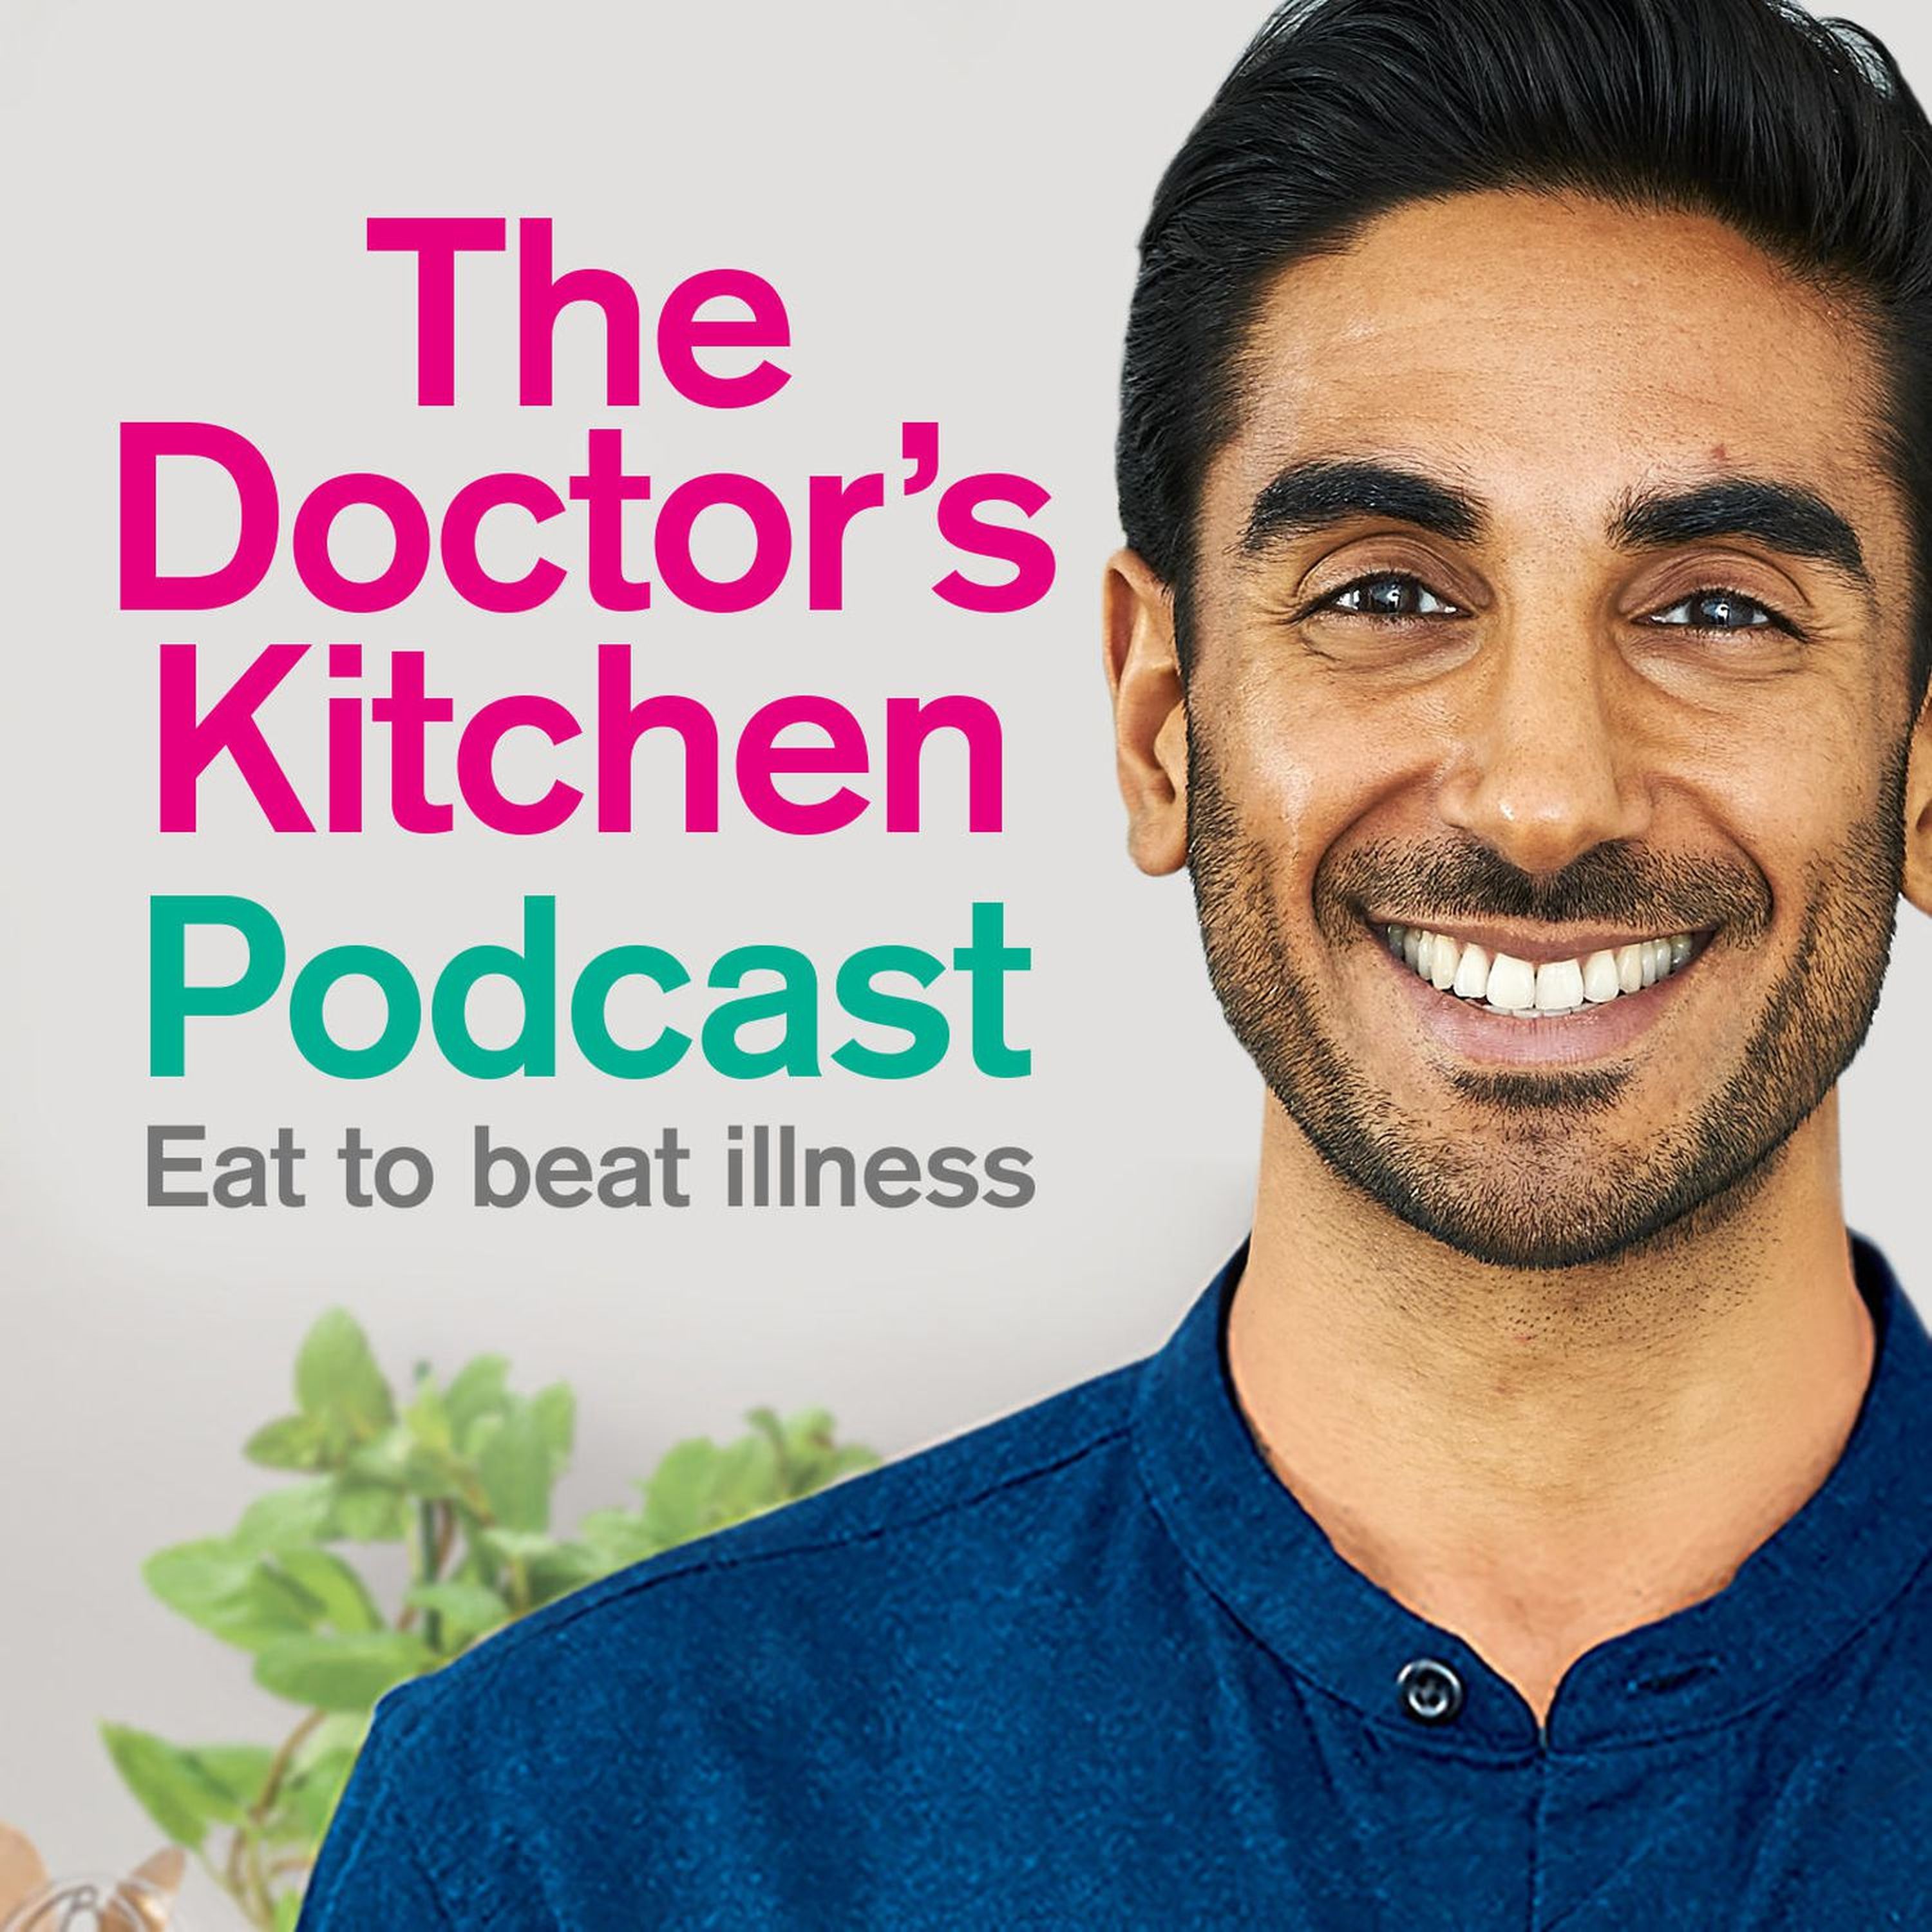 Best yoga & wellbeing books and podcasts - the doctor's kitchen podcast